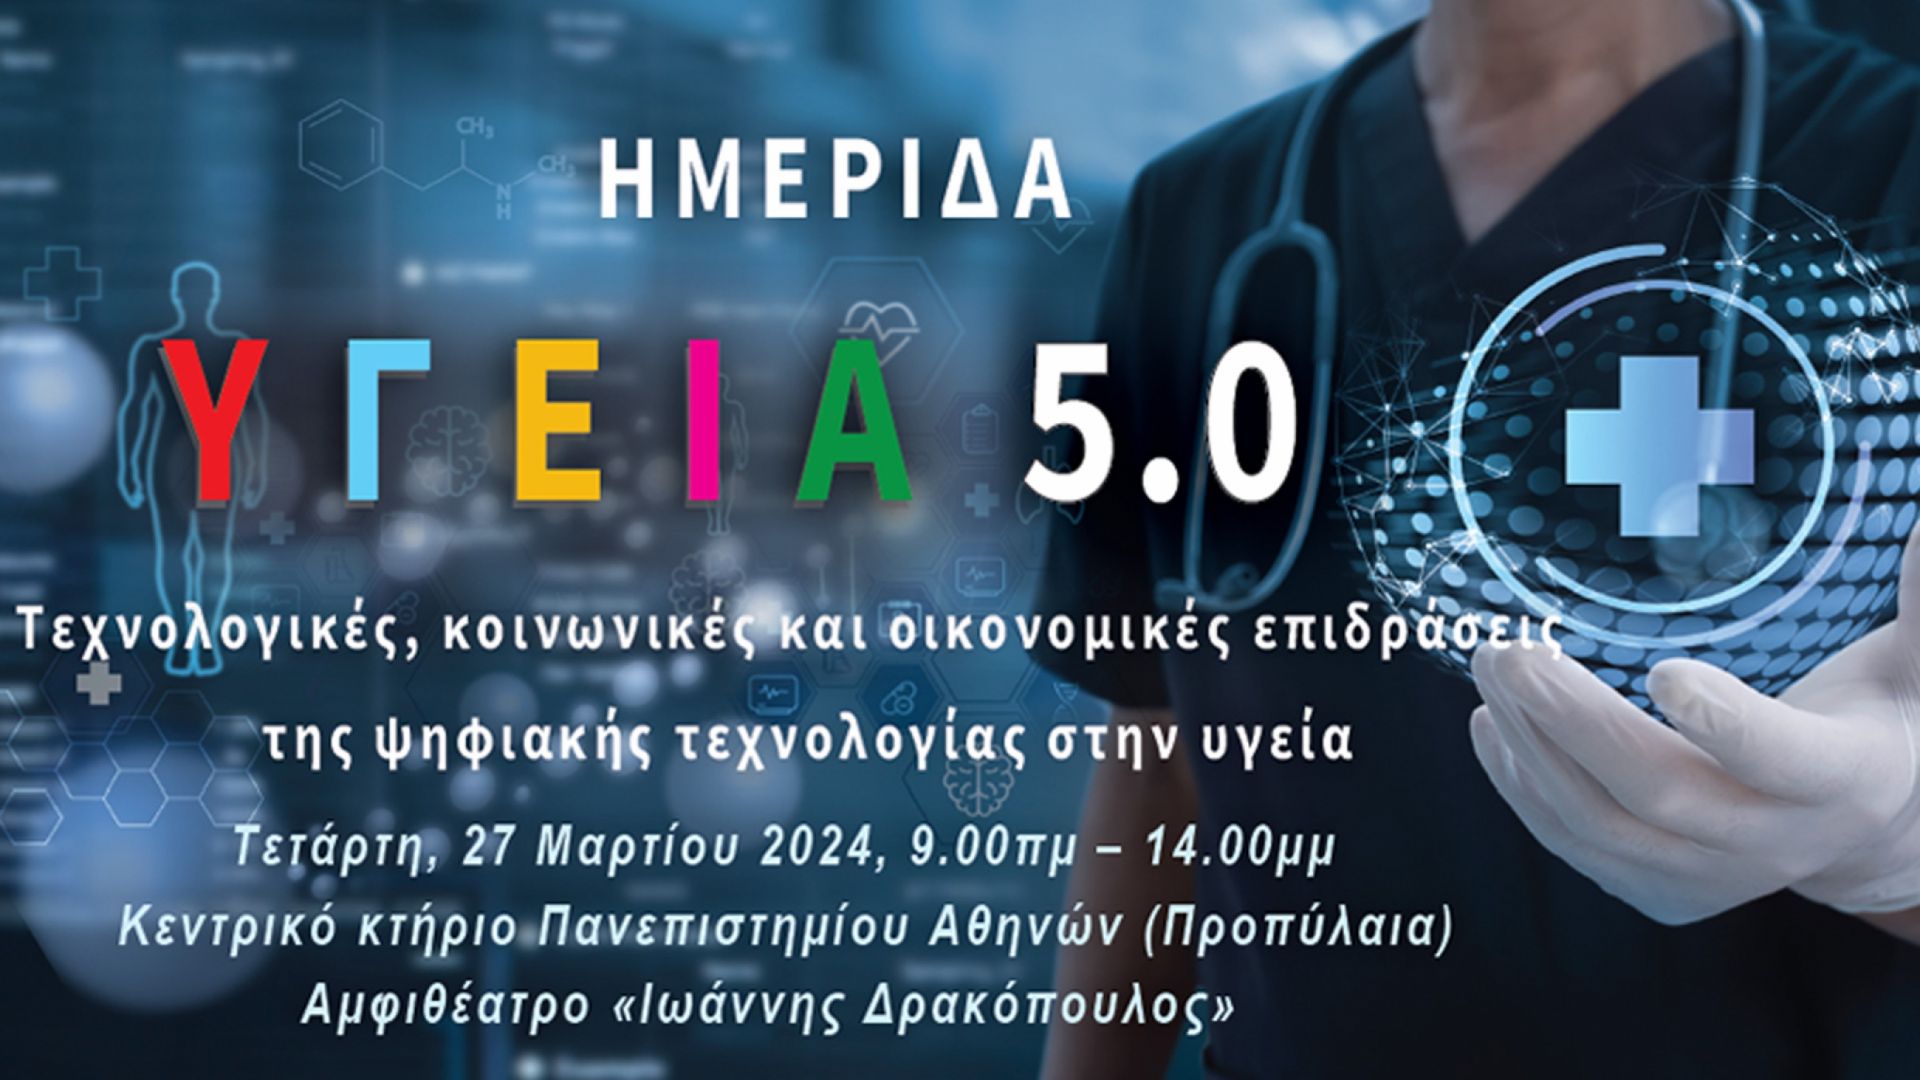 HEALTH 5.0: Technological, social and economic impacts of digital technology on health